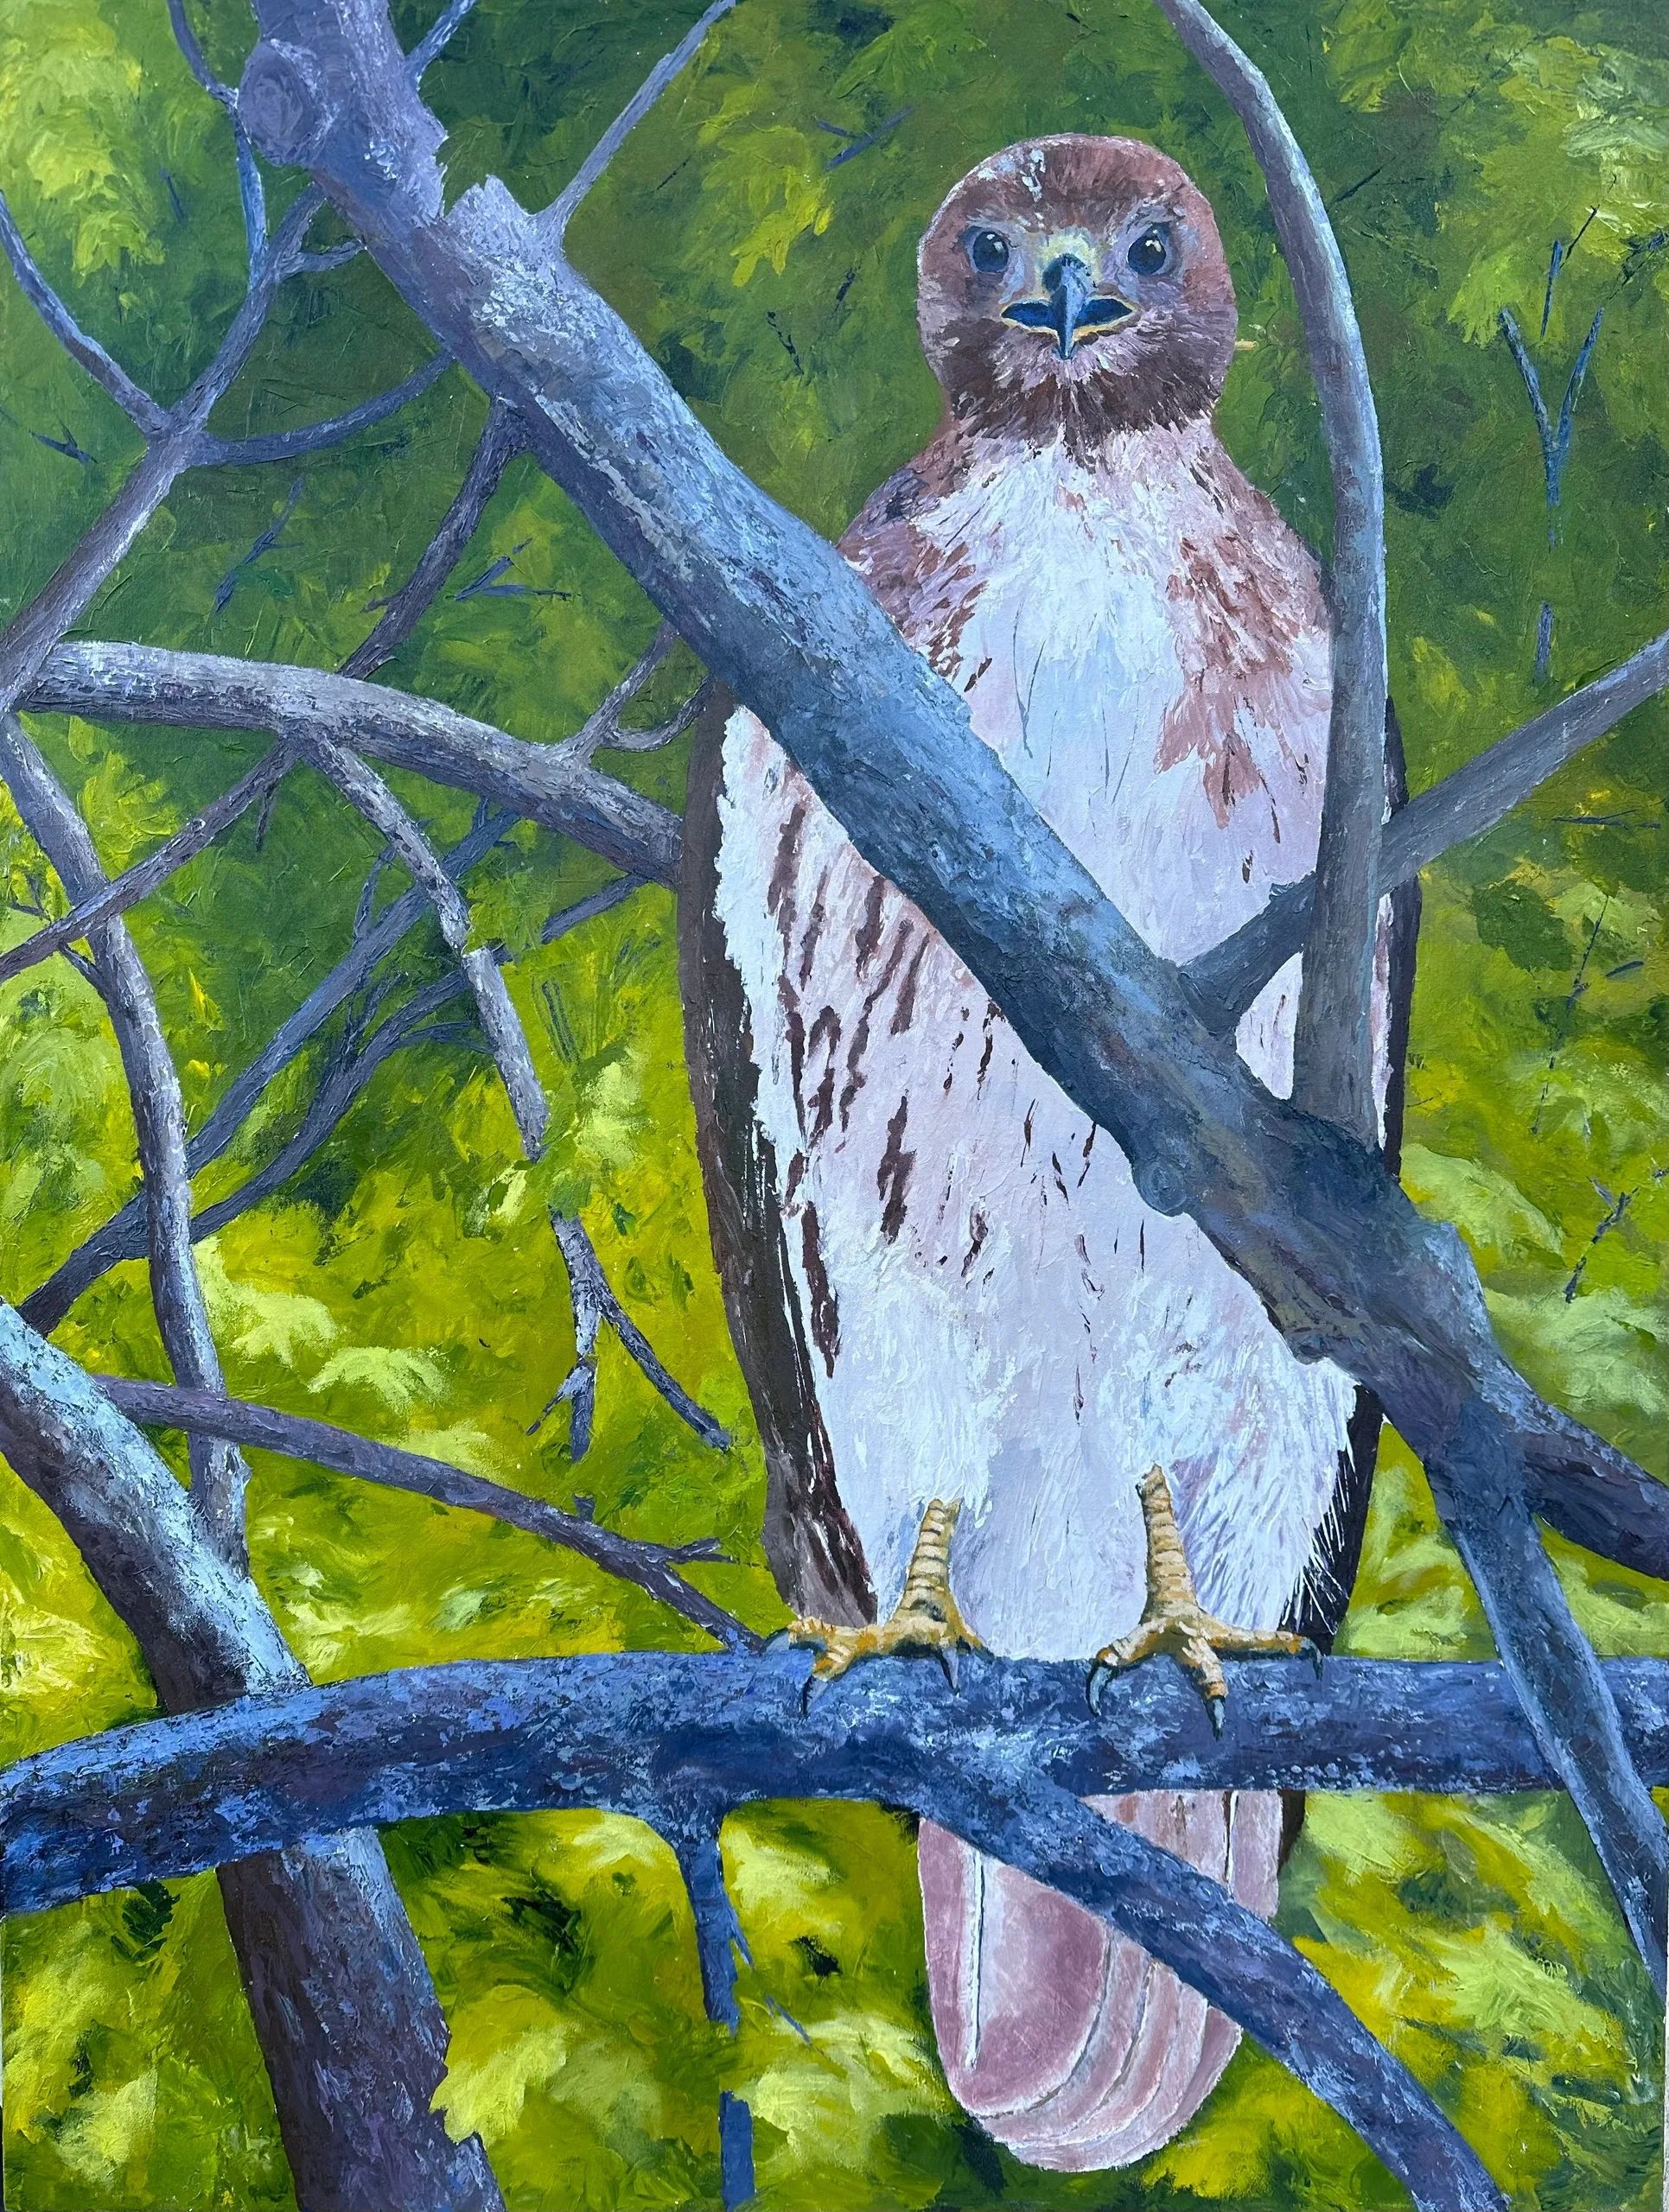 The Highland Hawk - 36" x 48"
Acrylic on Canvas - Private Collection